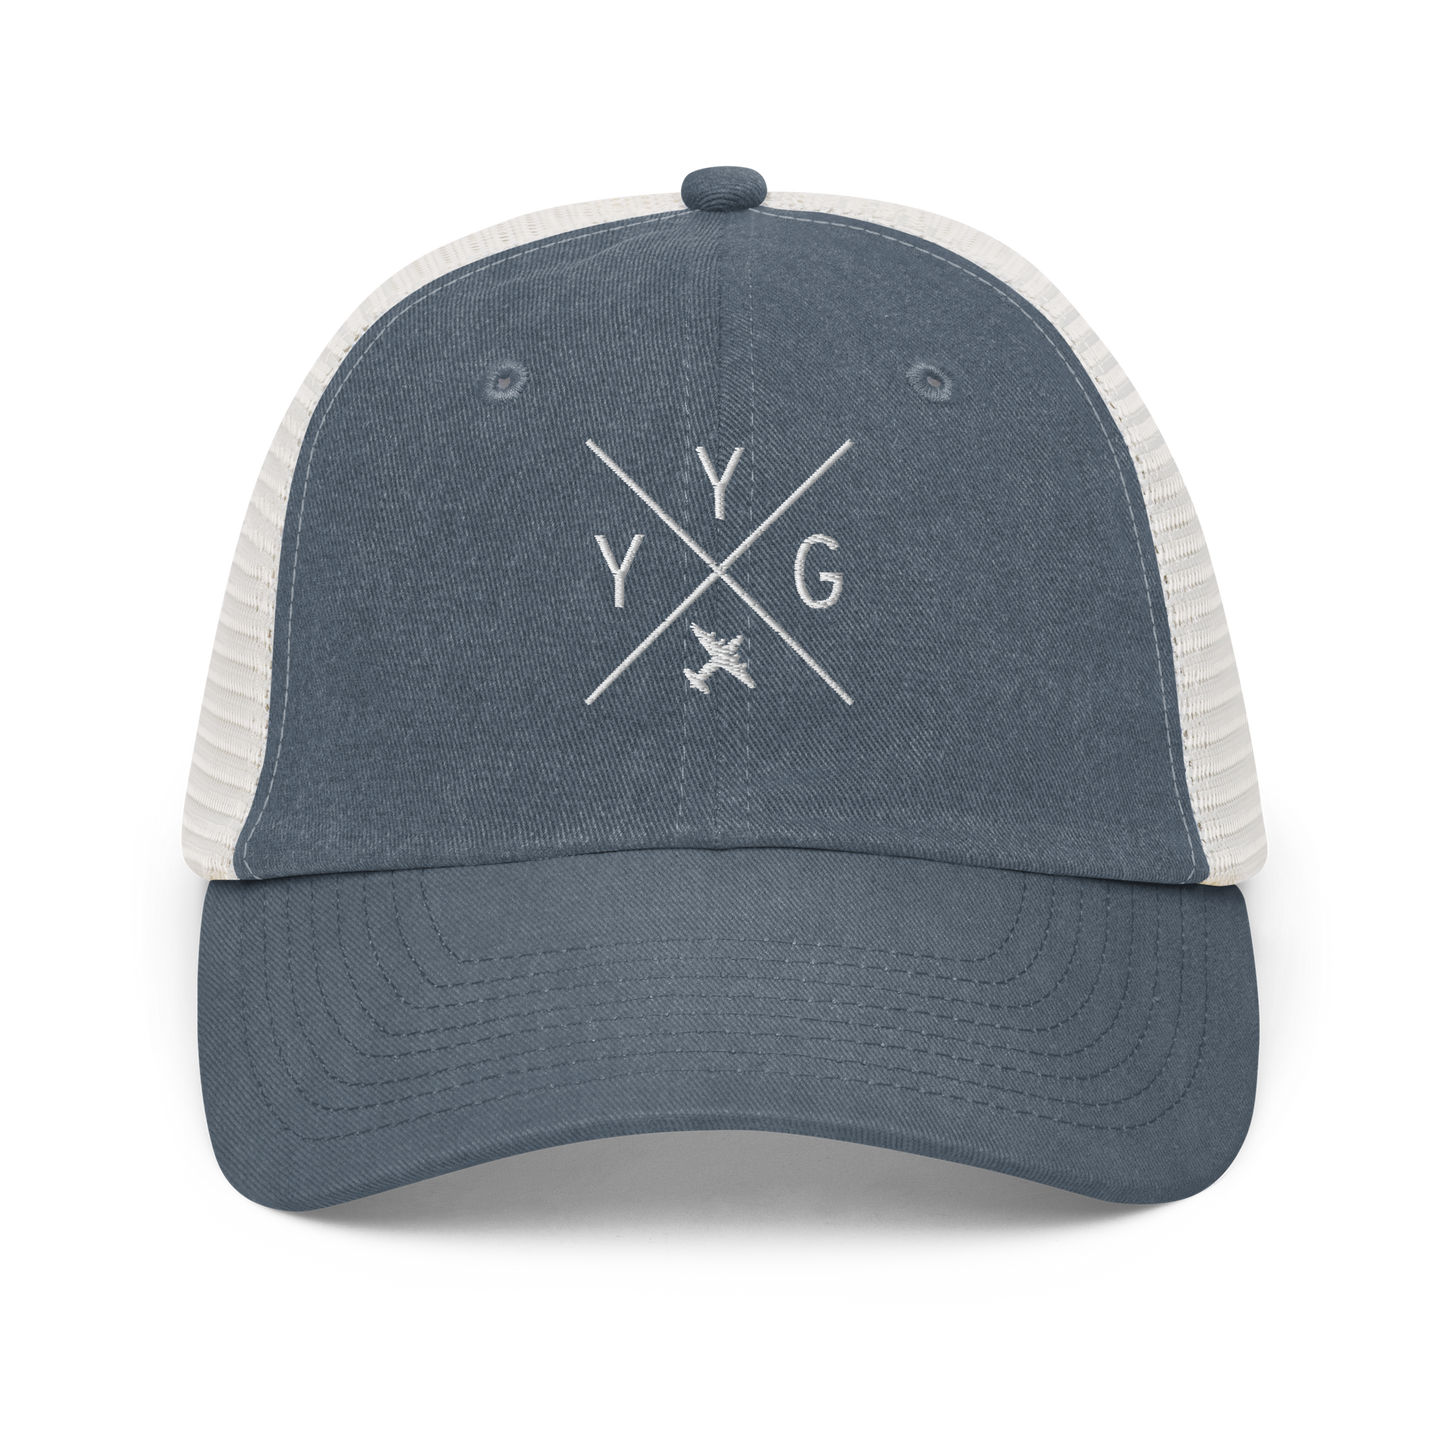 YHM Designs - YYG Charlottetown Pigment-Dyed Trucker Cap - Crossed-X Design with Airport Code and Vintage Propliner - White Embroidery - Image 06